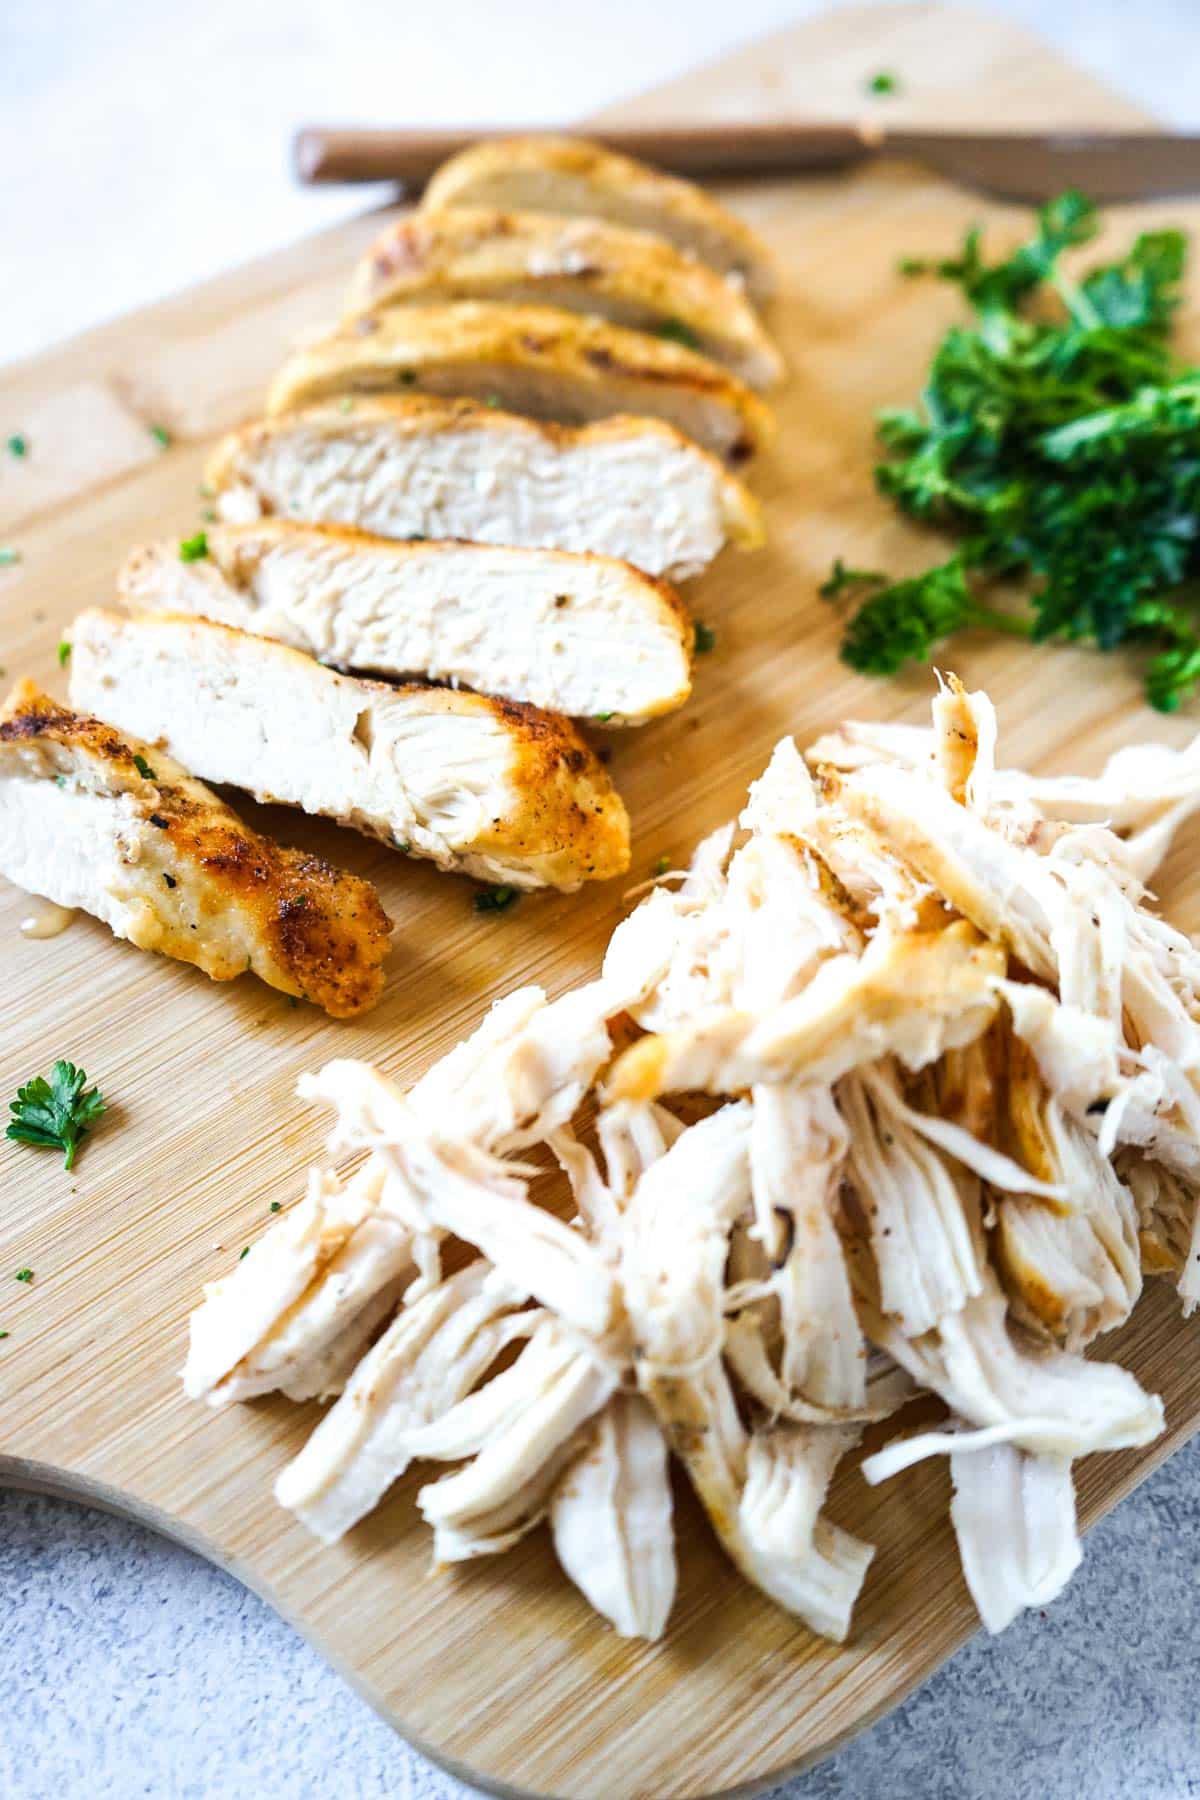 Sliced chicken breast and shredded chicken breast cooked in the air fryer on a cutting board.